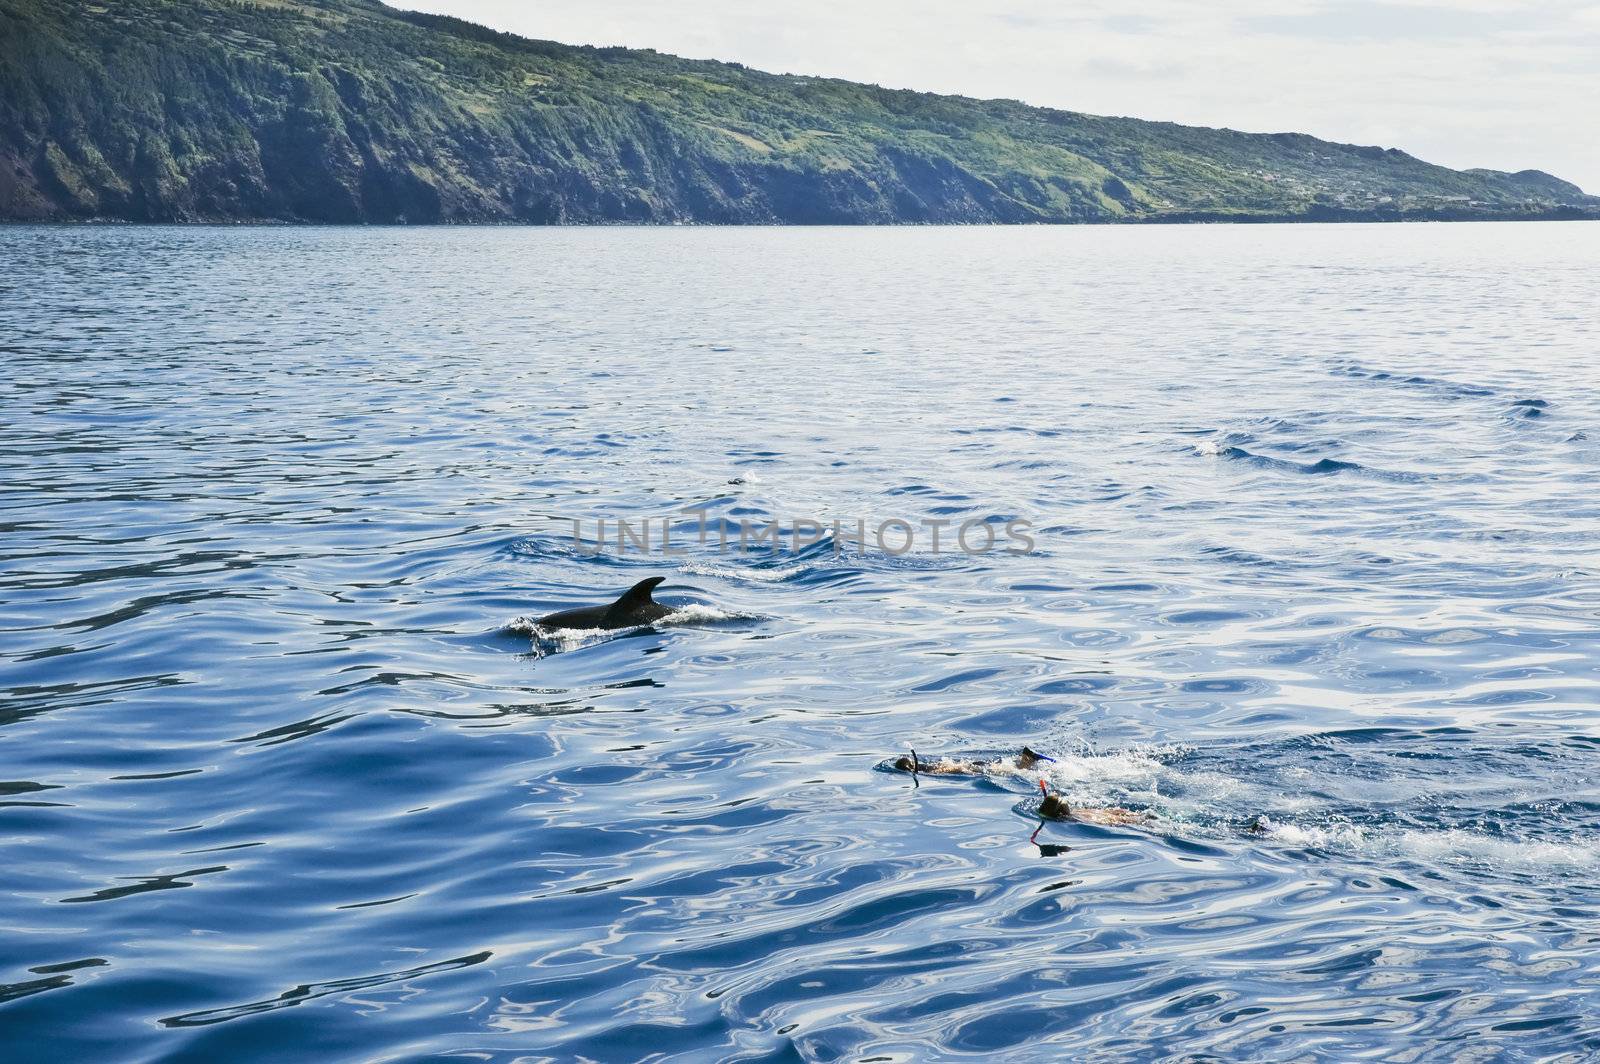 Boys swimming with the dolphins near the shore in Pico island, Azores, Portugal
